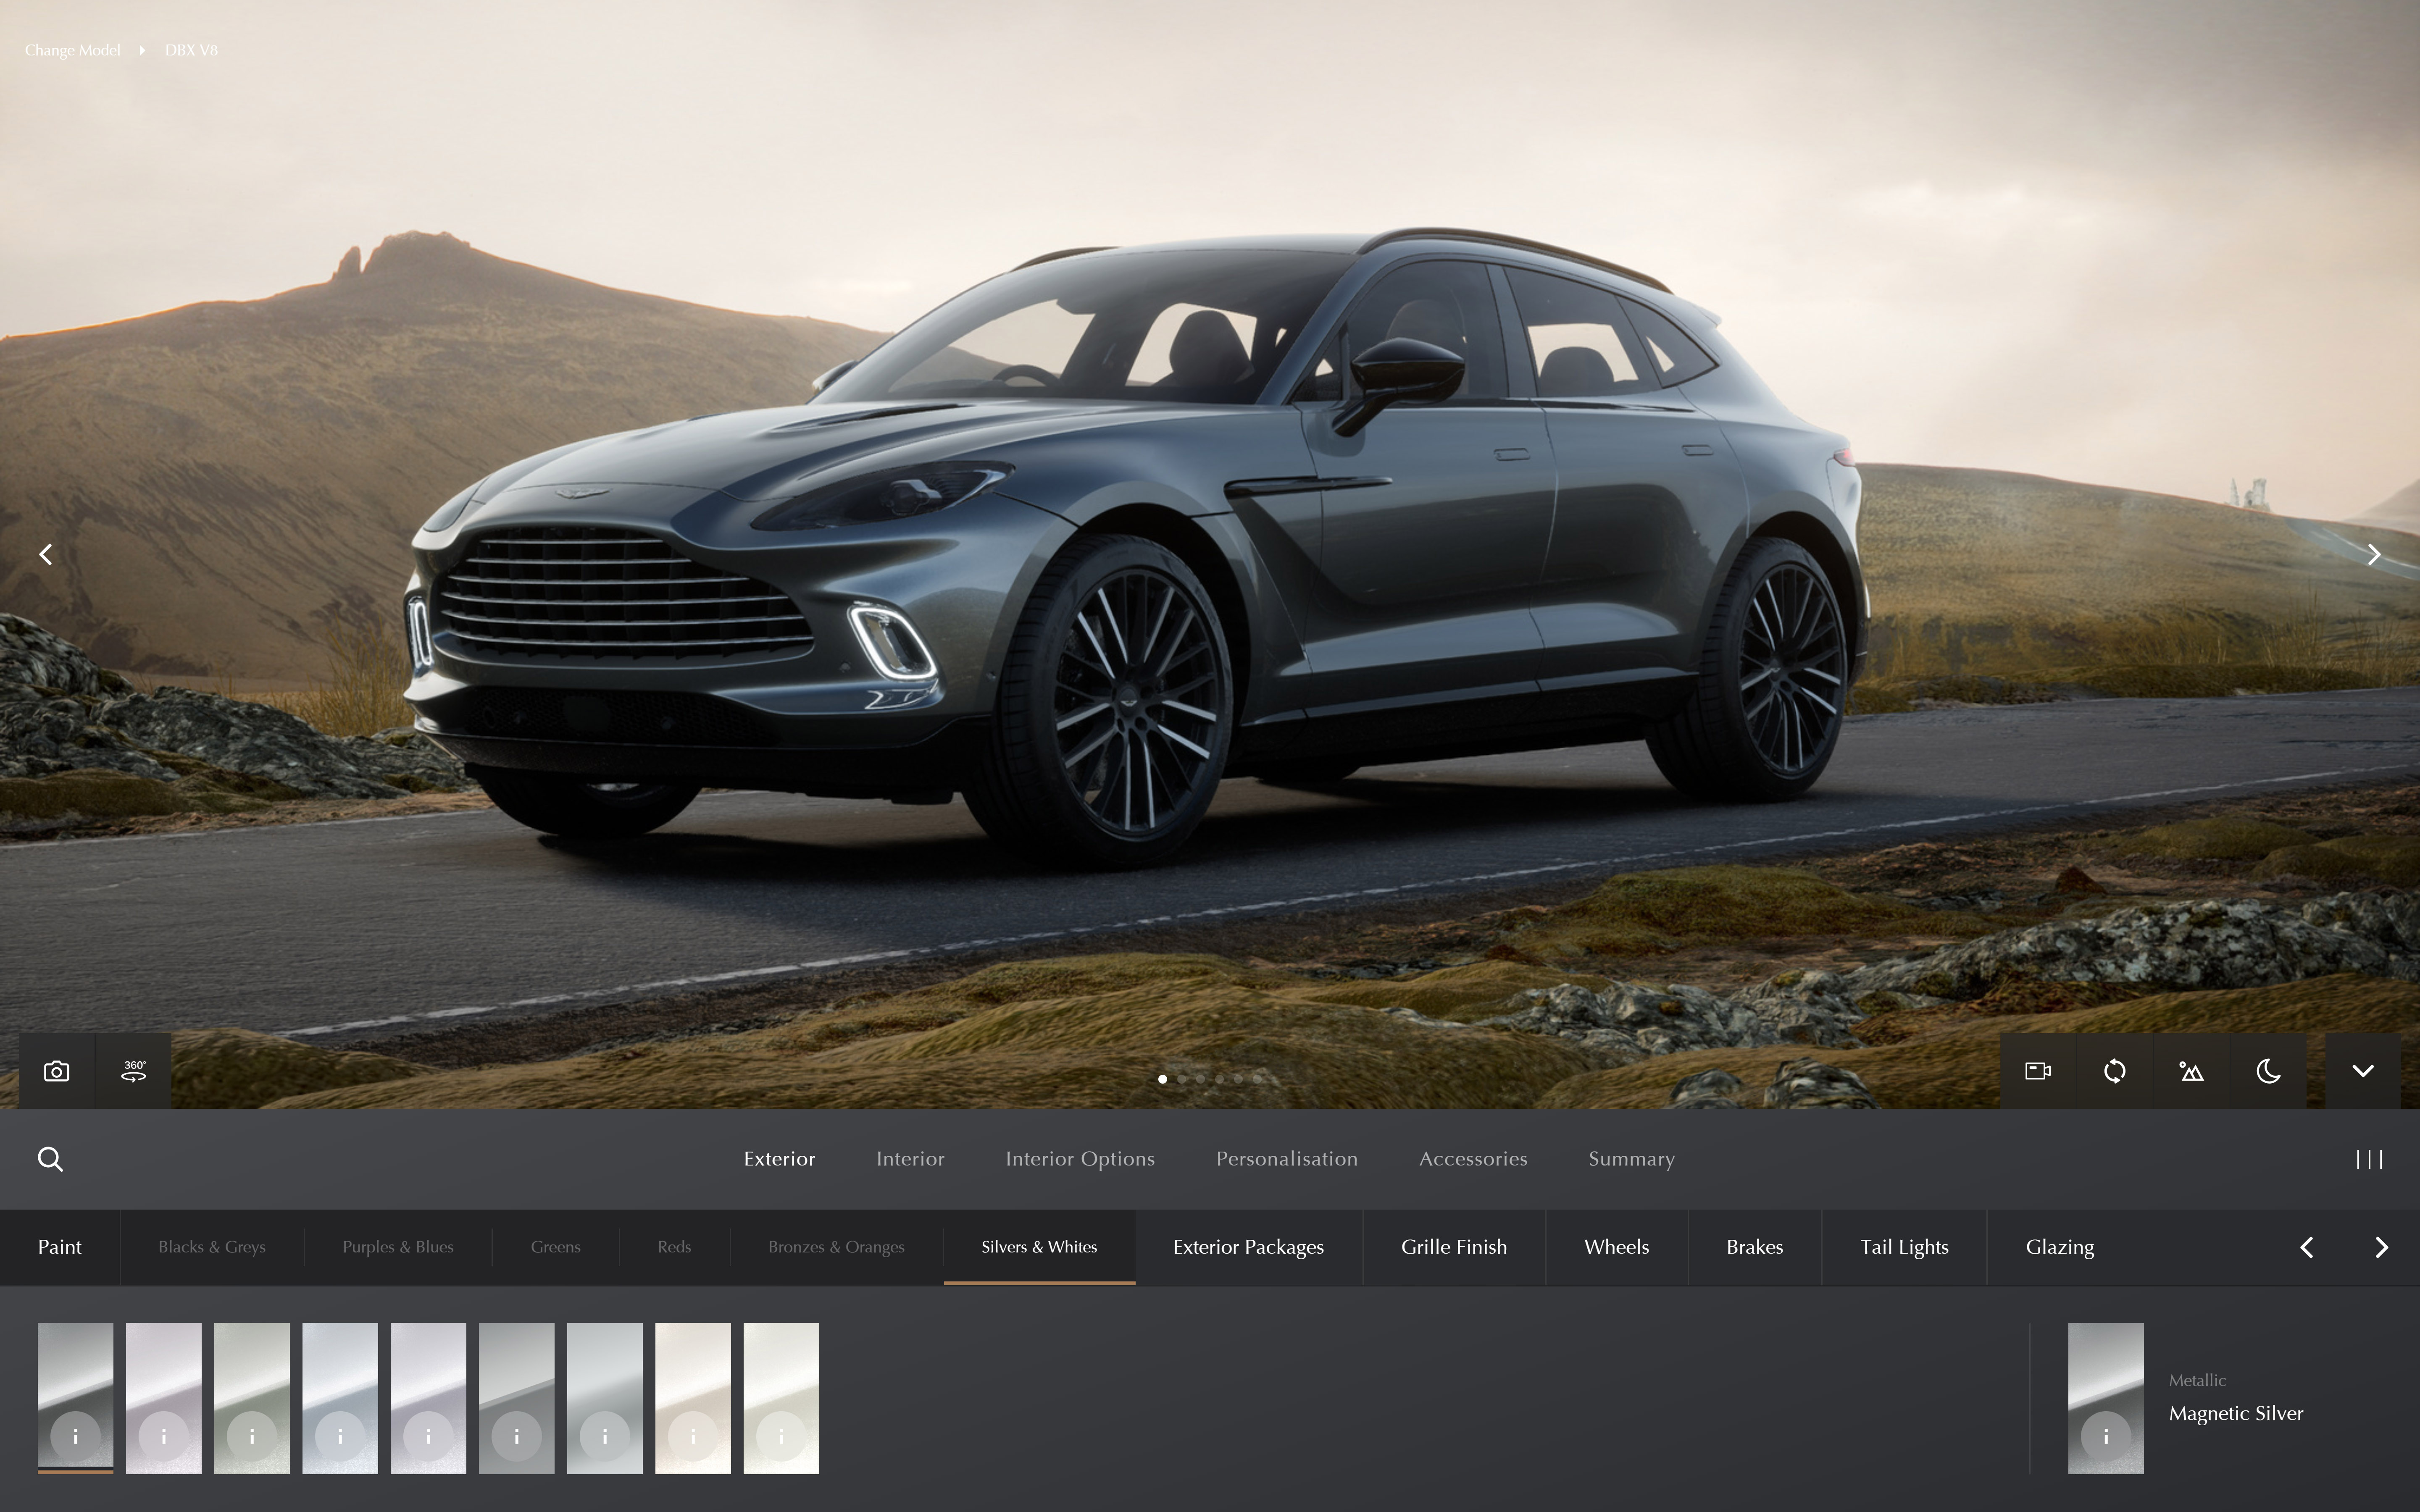 Aston Martin launches new online configurator and reveals 22MY updates offering more power, and enhanced choice